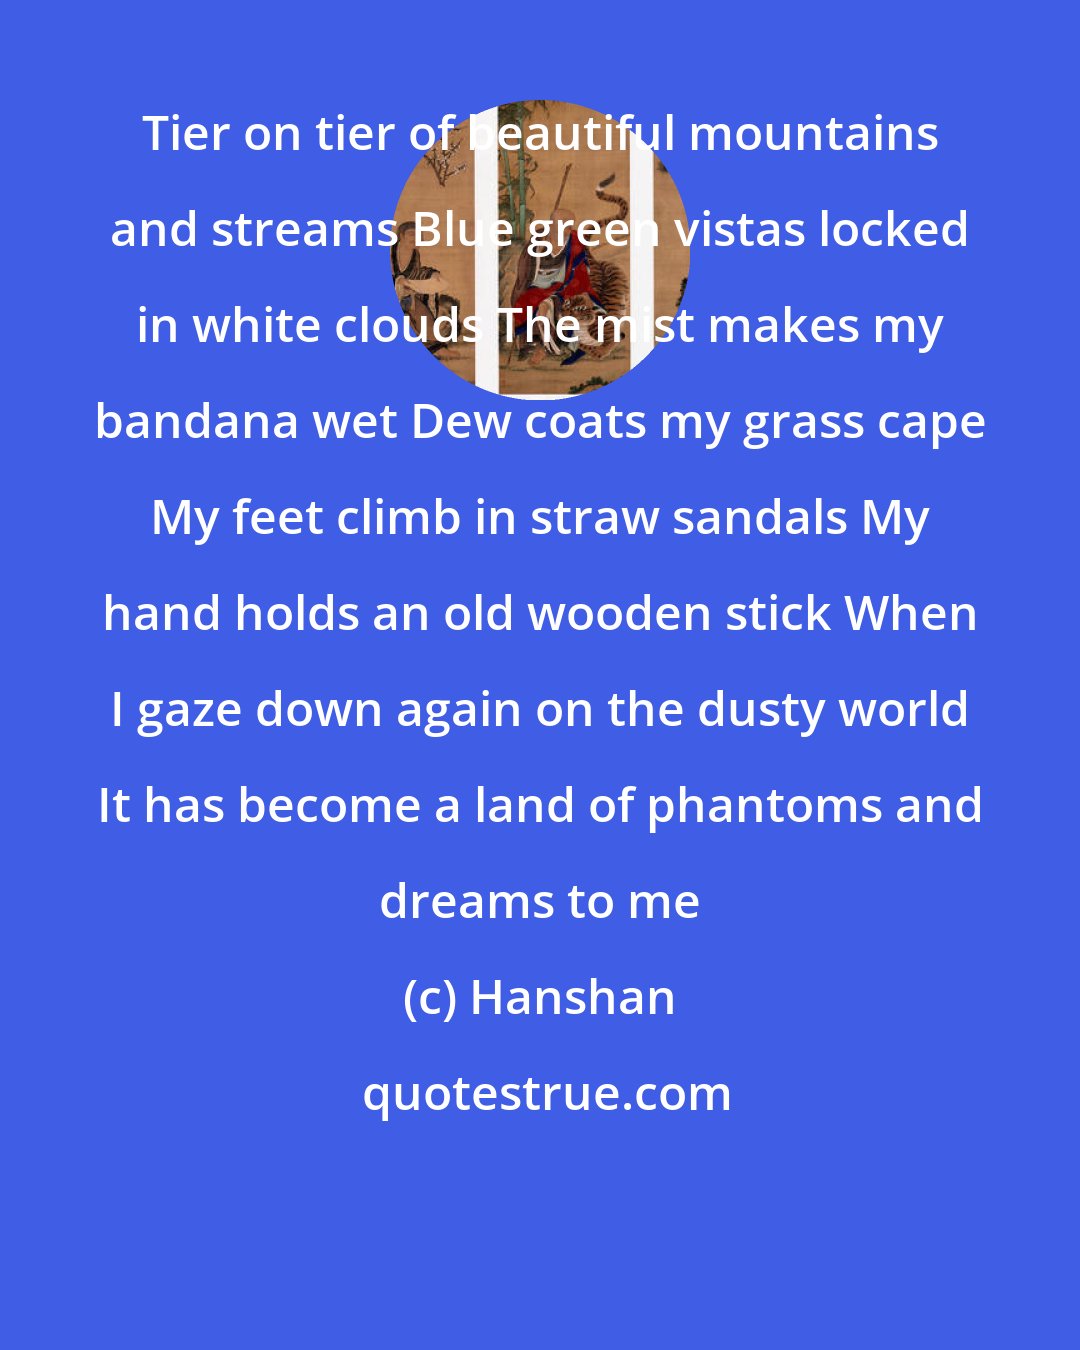 Hanshan: Tier on tier of beautiful mountains and streams Blue green vistas locked in white clouds The mist makes my bandana wet Dew coats my grass cape My feet climb in straw sandals My hand holds an old wooden stick When I gaze down again on the dusty world It has become a land of phantoms and dreams to me